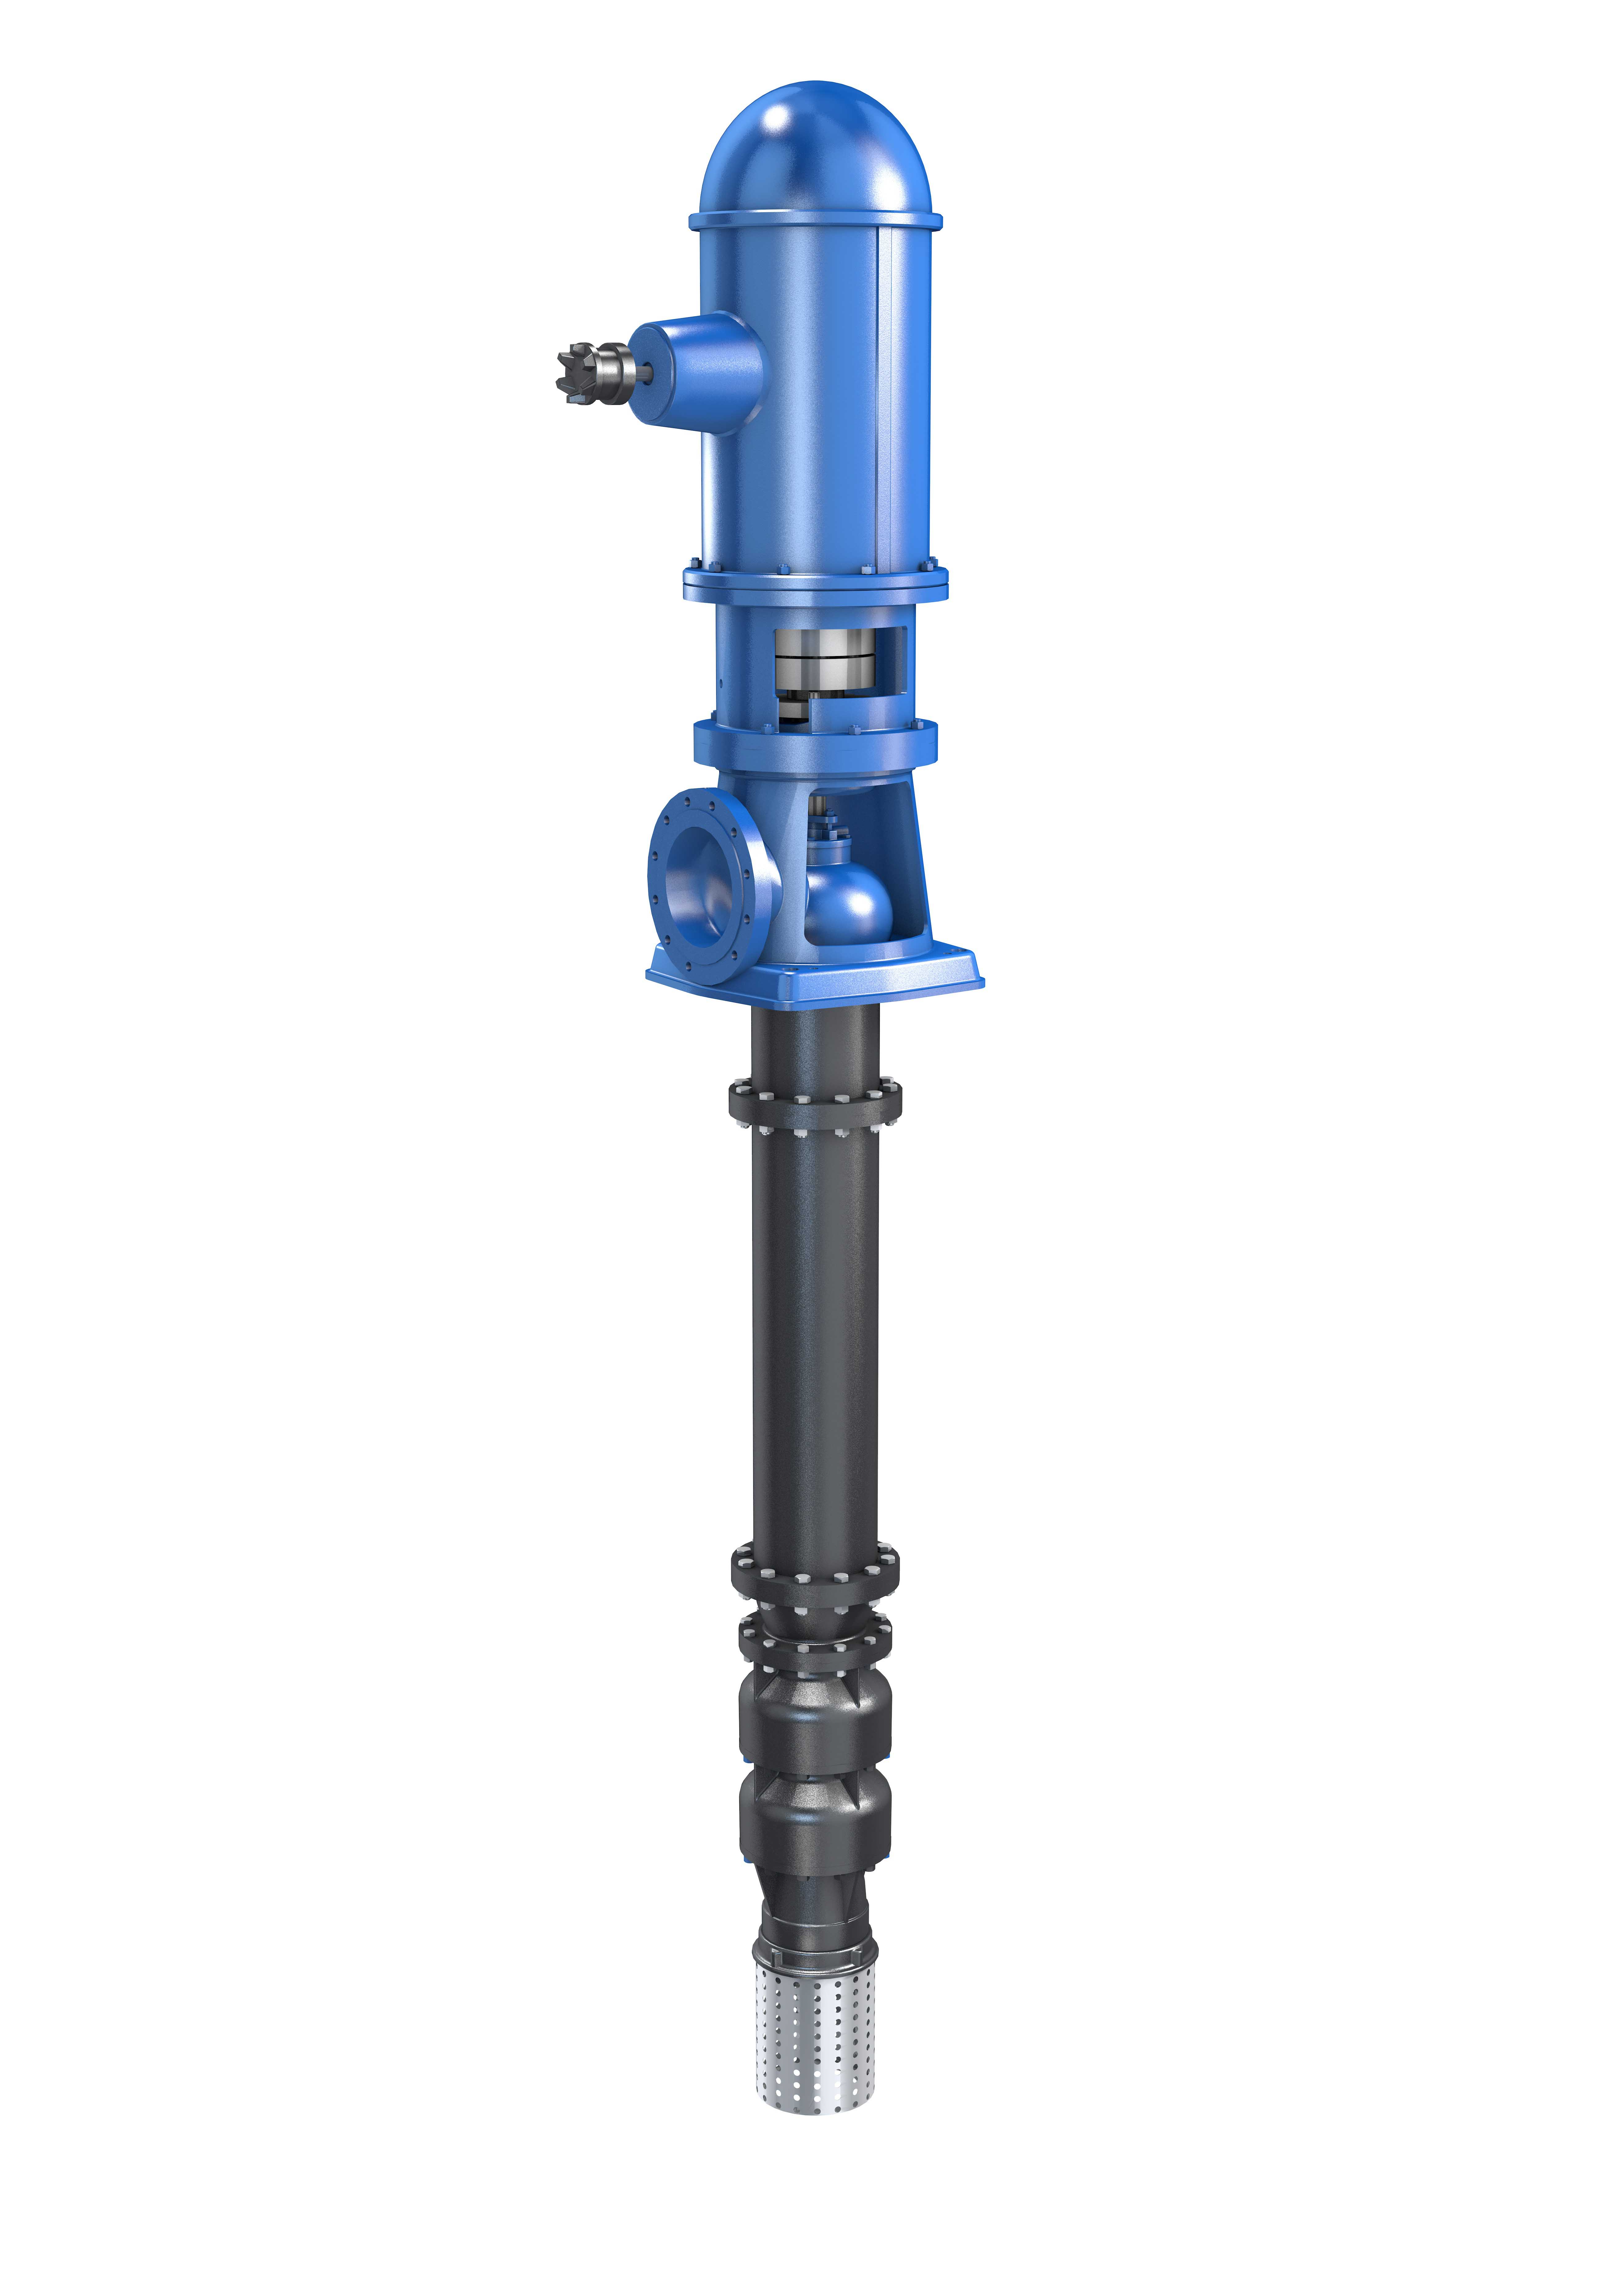 Designs in the B Pump series offer either an above-floor or underfloor discharge. (© KSB SE & Co. KGaA, Frankenthal, Germany)